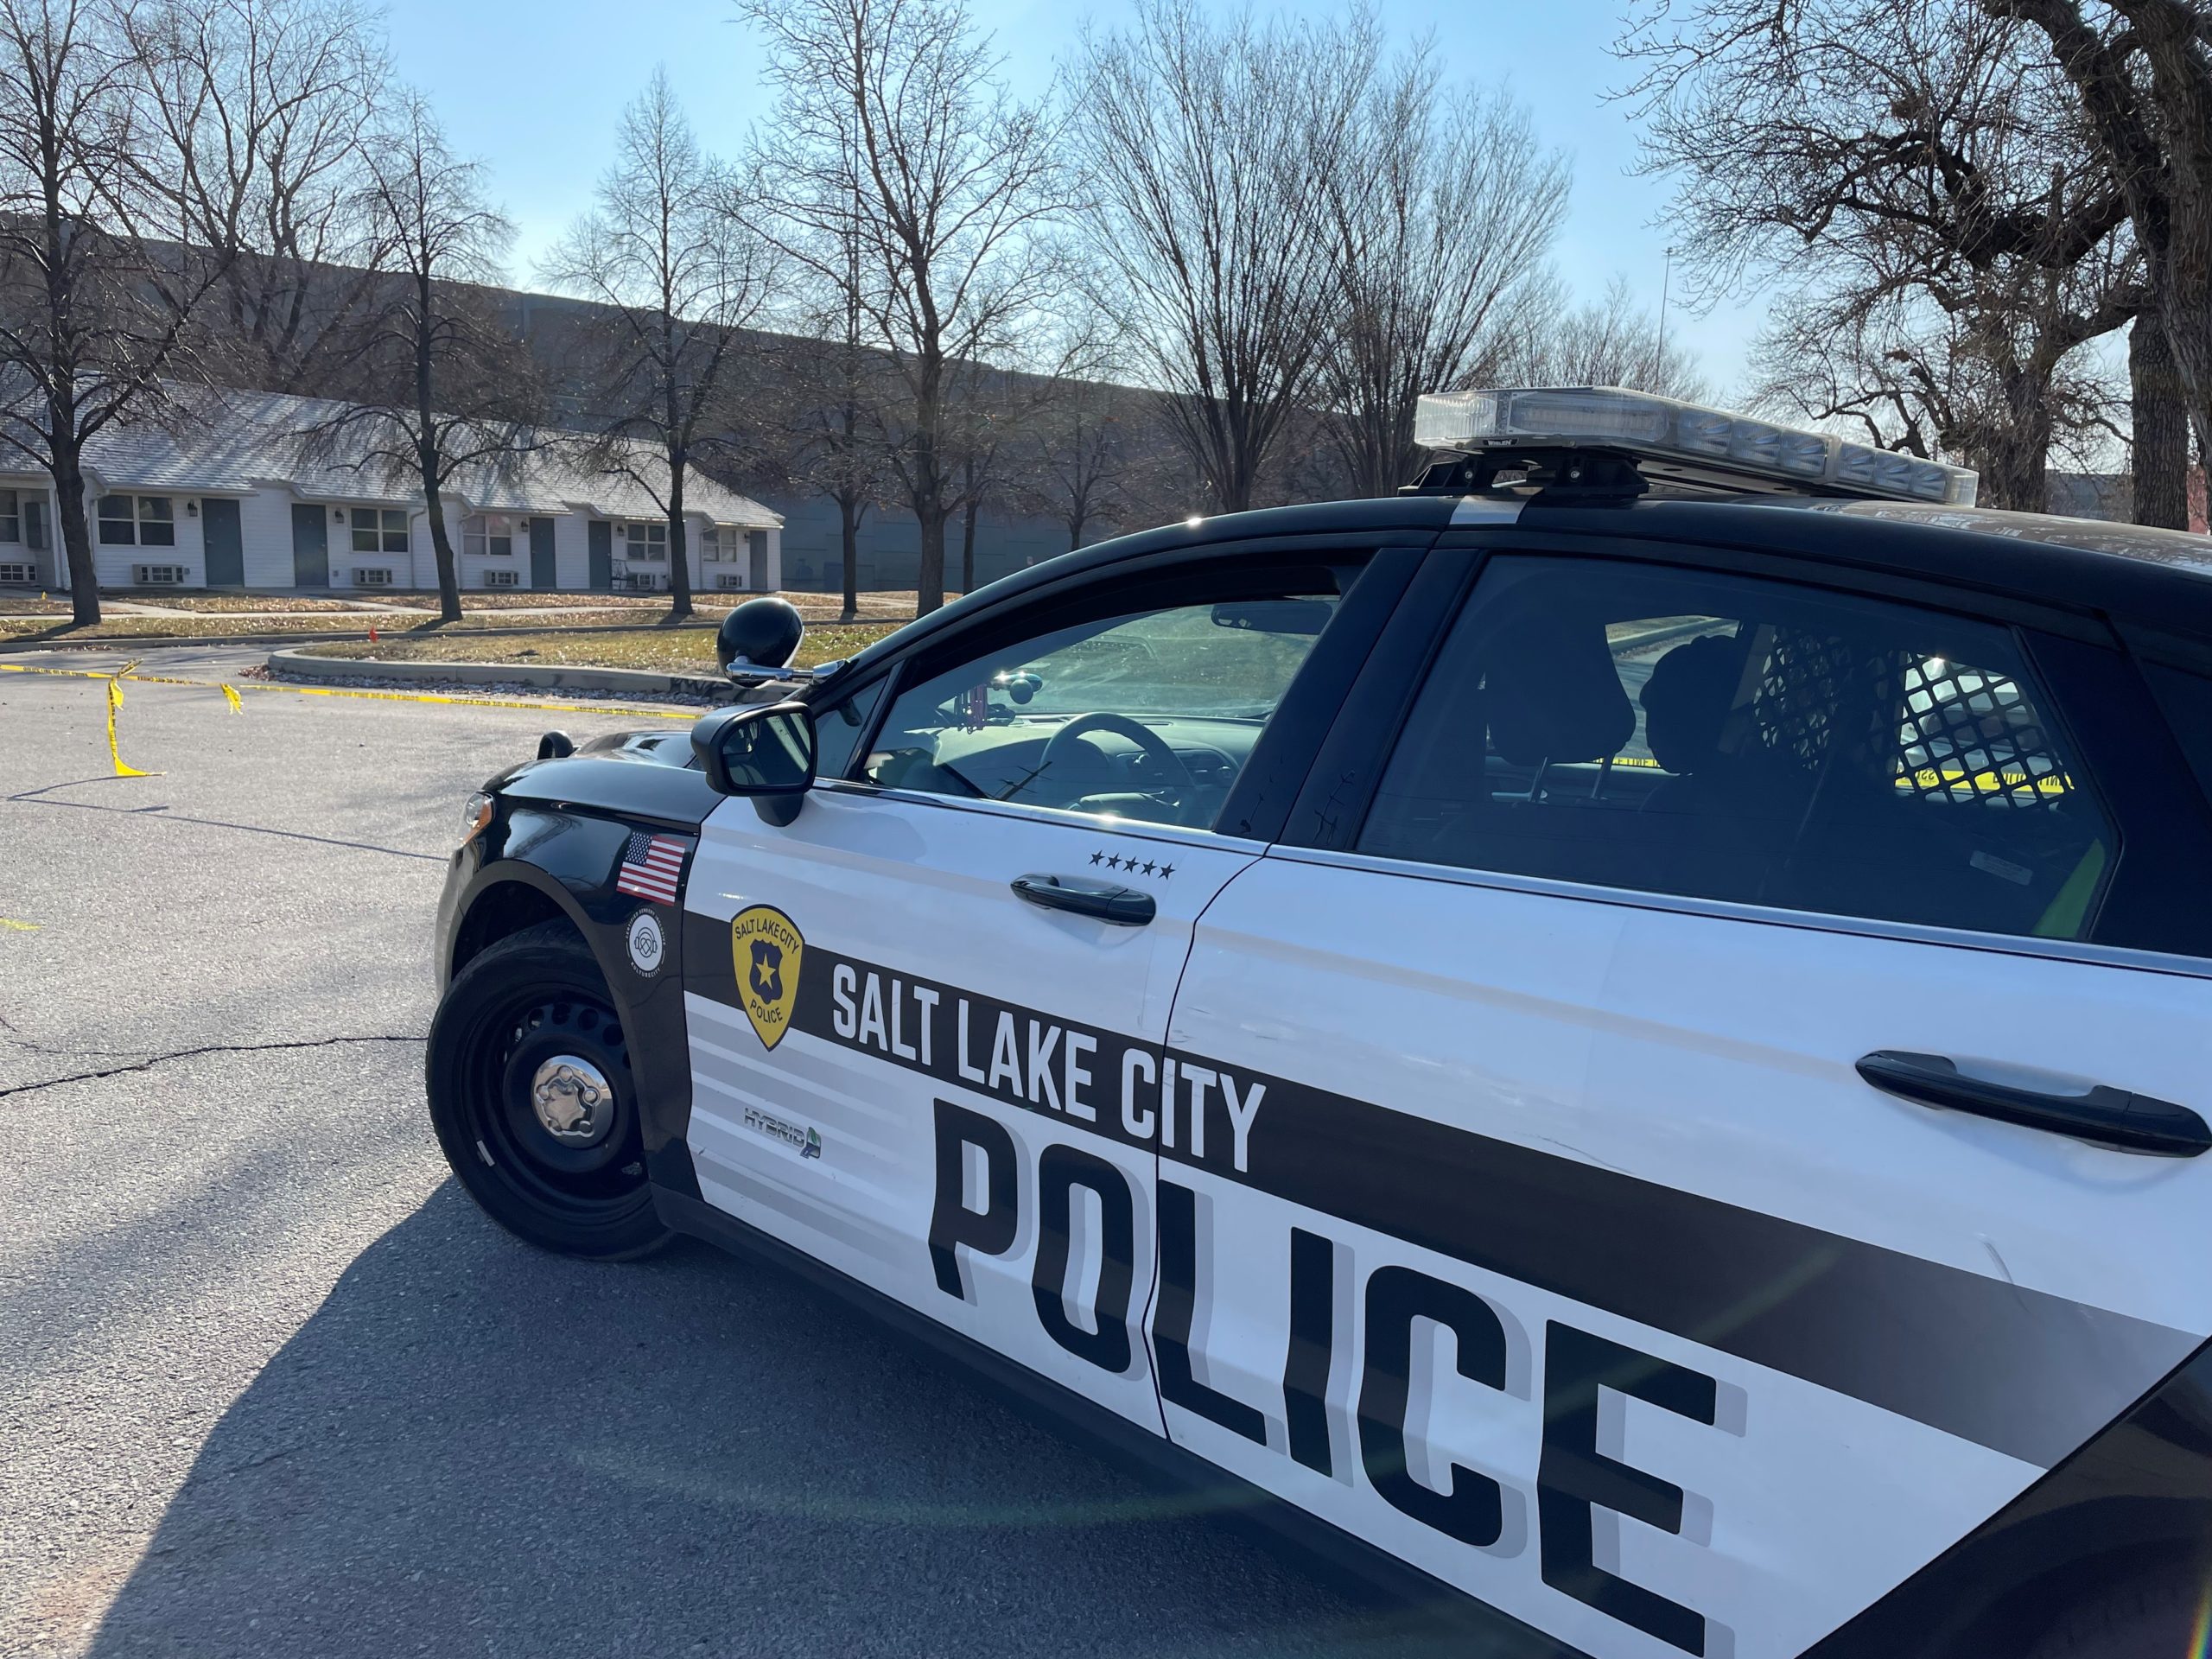 The Salt Lake City Police Department is investigation the shooting death of one person on Sunday, J...